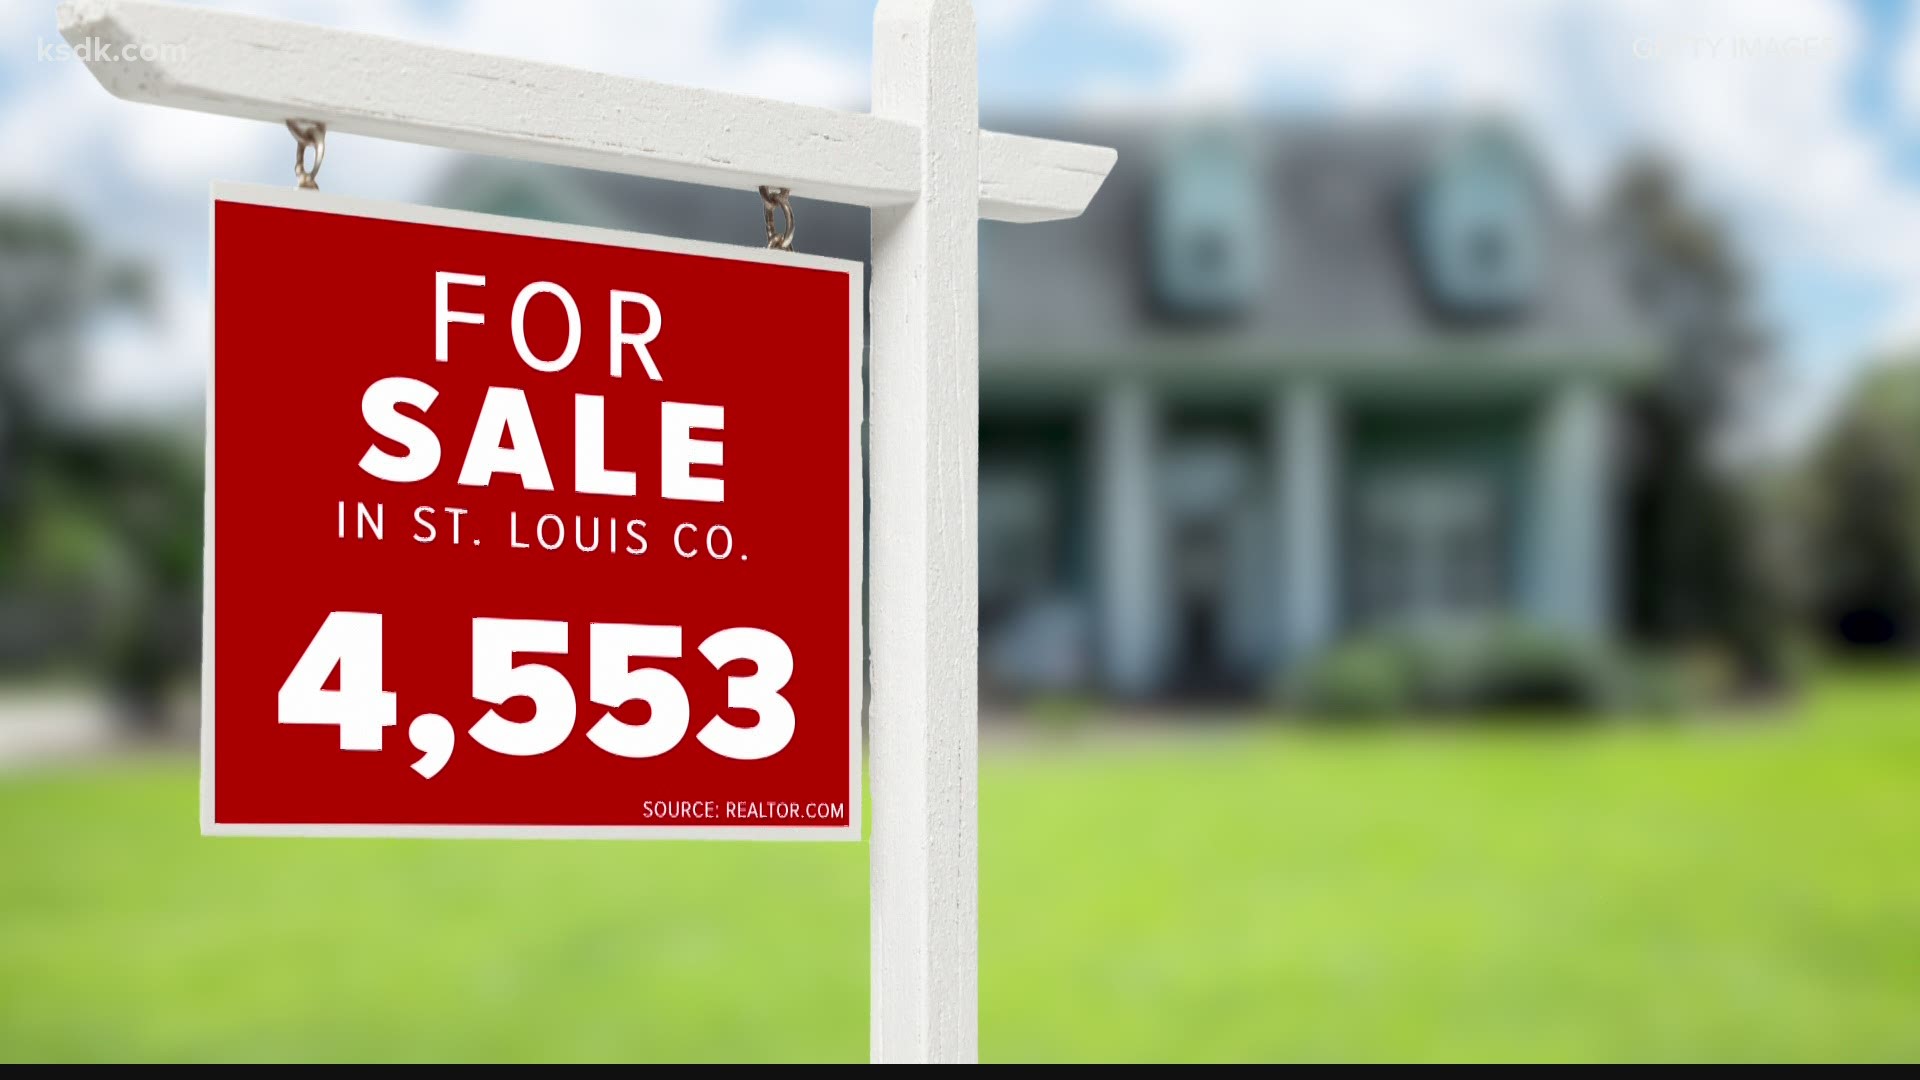 If you are interested in buying or selling a home, a local realtor said now is the time.